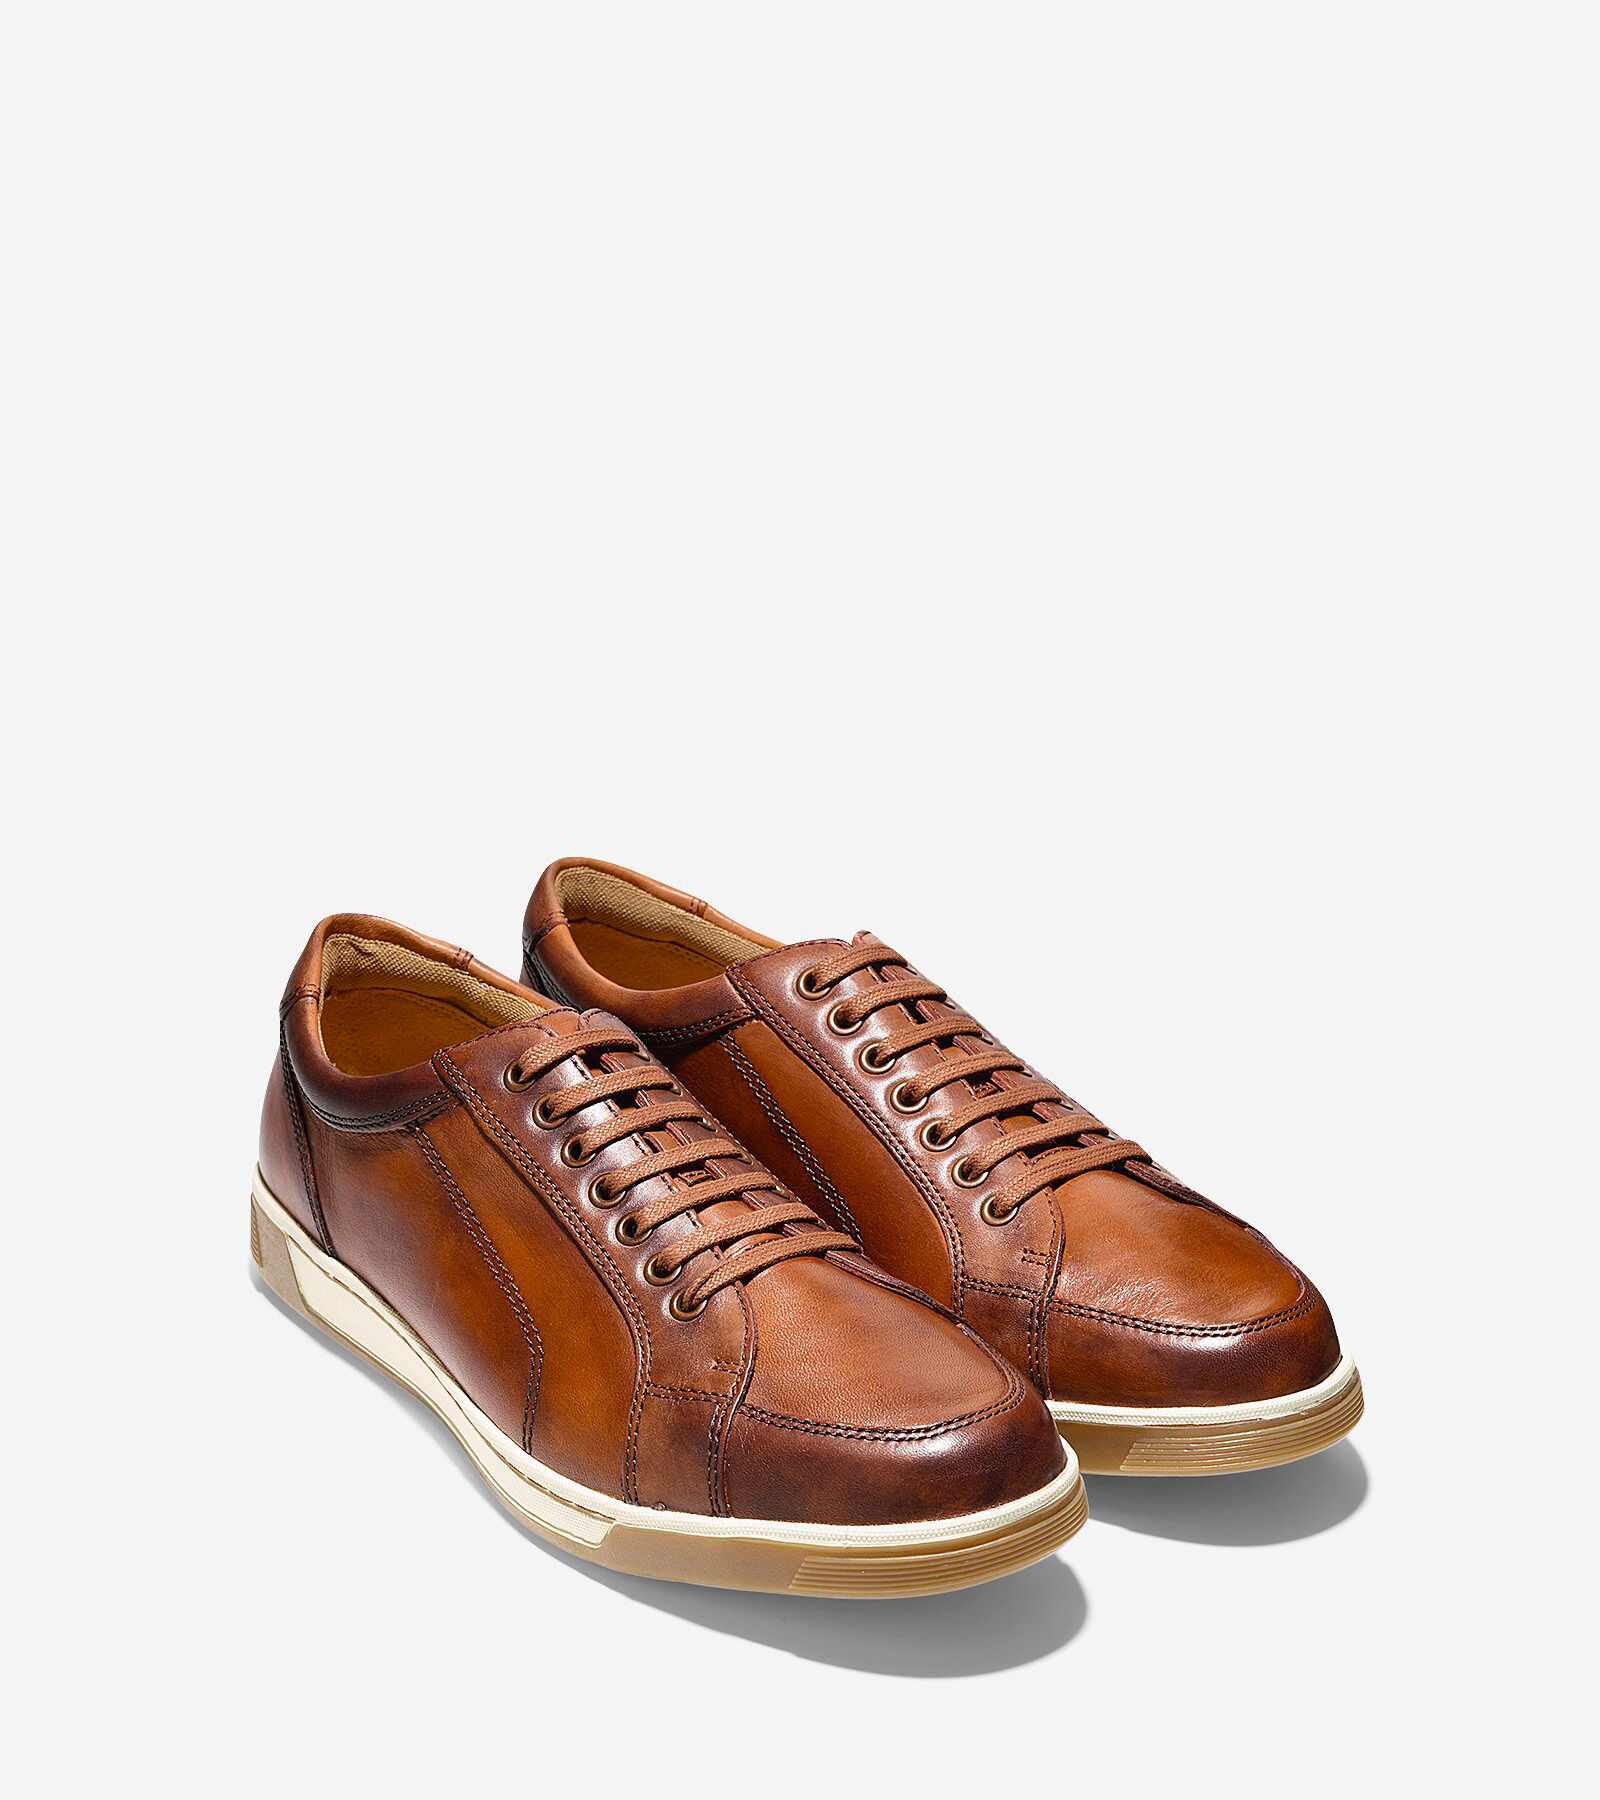 Men's Vartan Hand-Stained Sport Oxford 